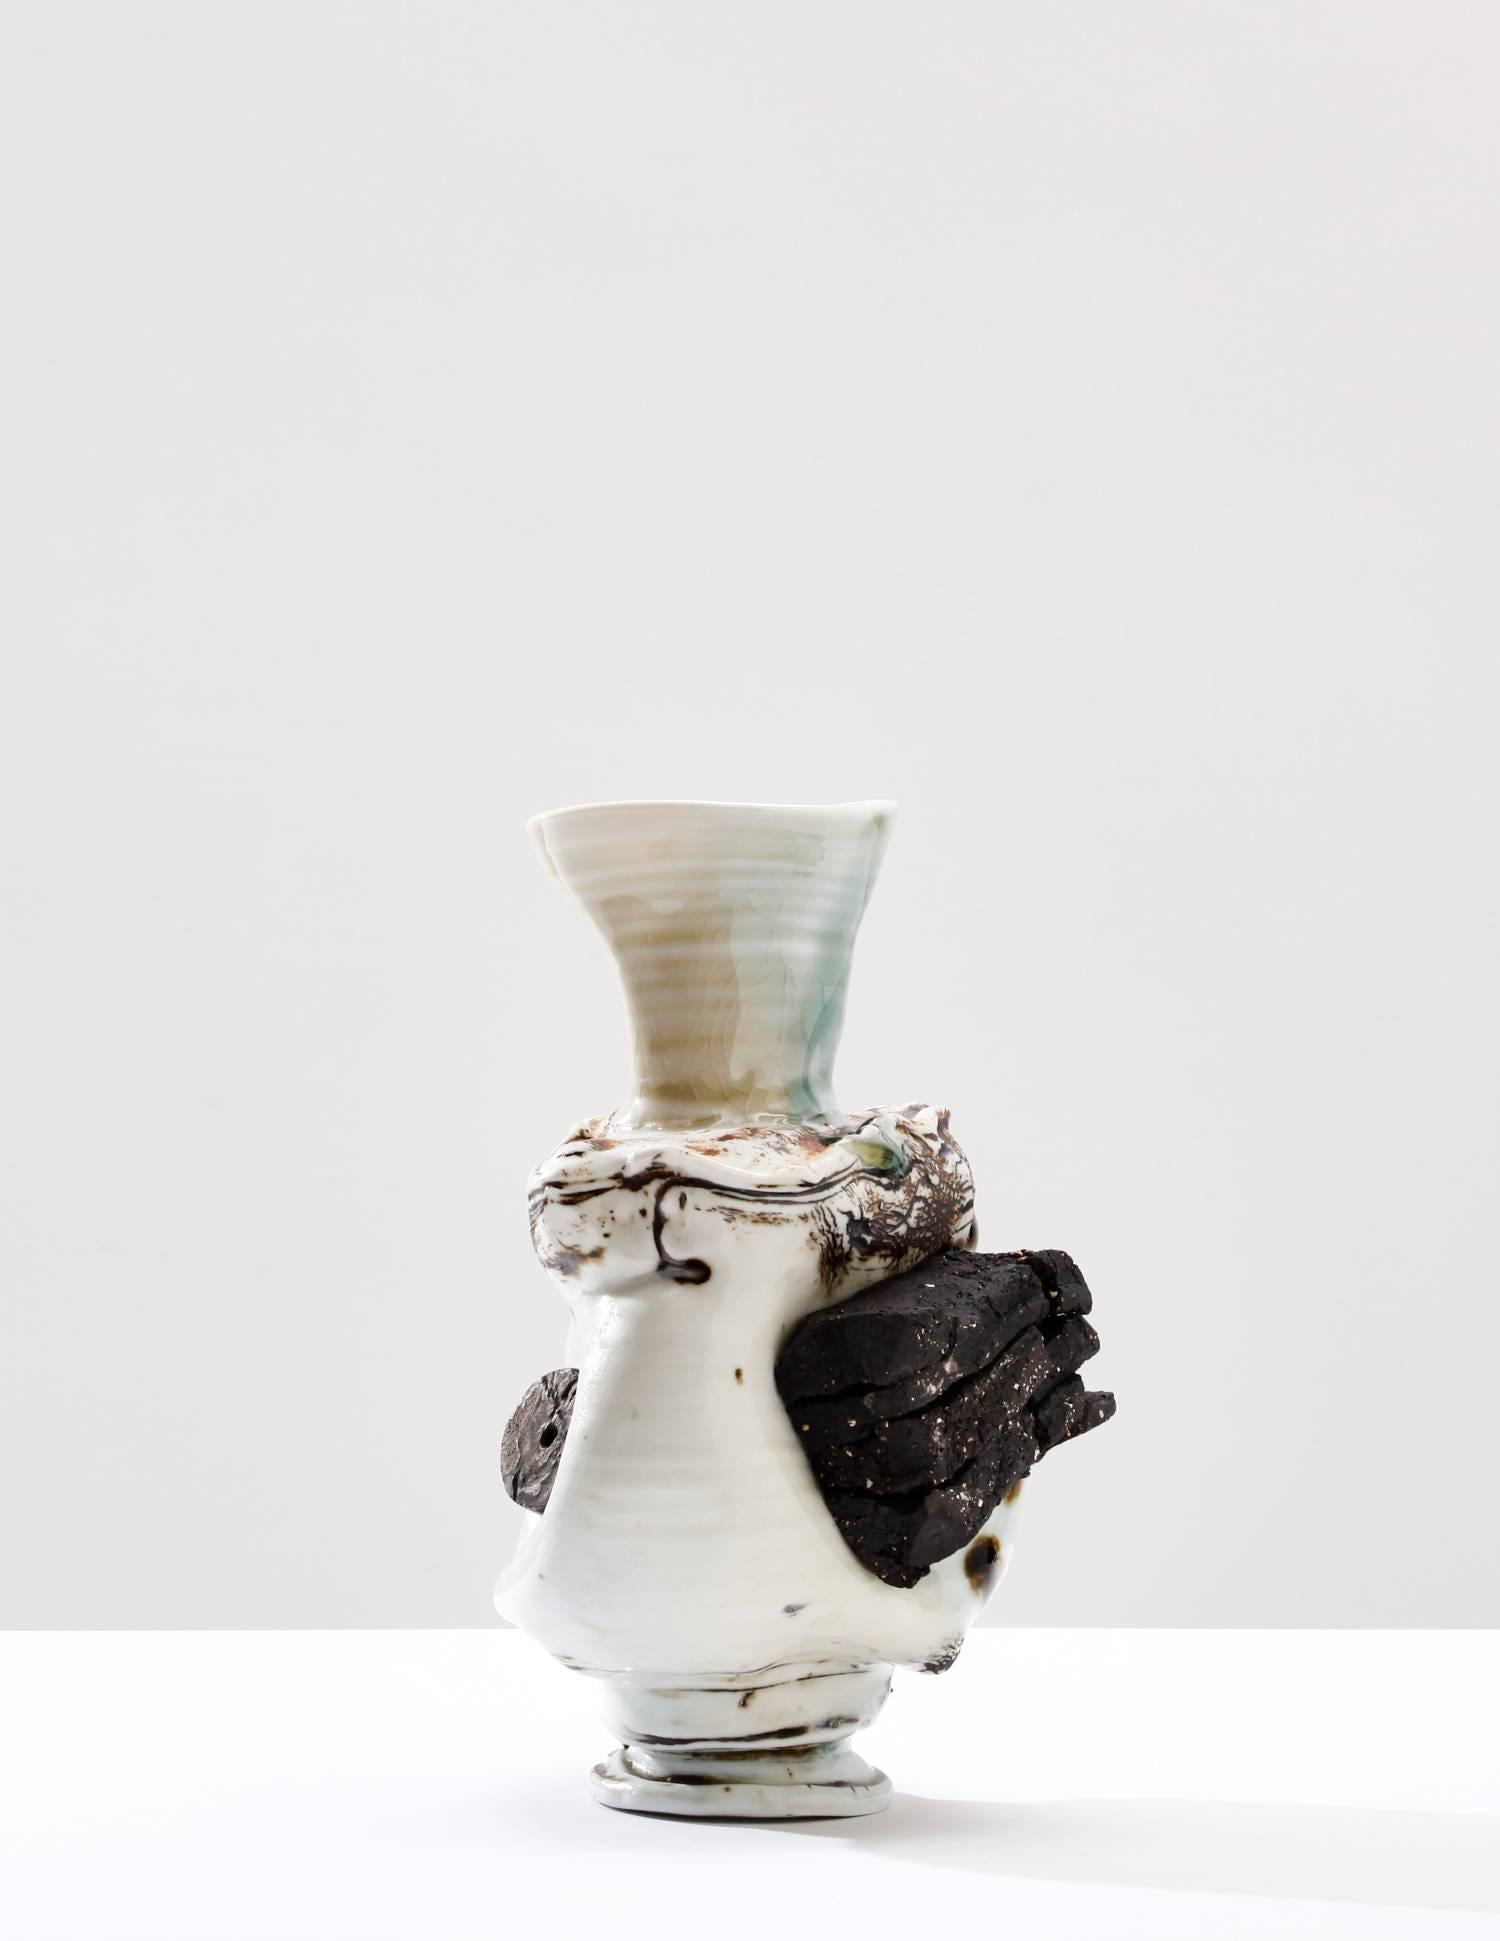 Reinterpreting forms associated with traditional vases and decorative objects, British ceramist Gareth Mason magically turns his ceramic creations into highly textural bodies. He incorporates materials such as porcelain, oxides, and lustre to the